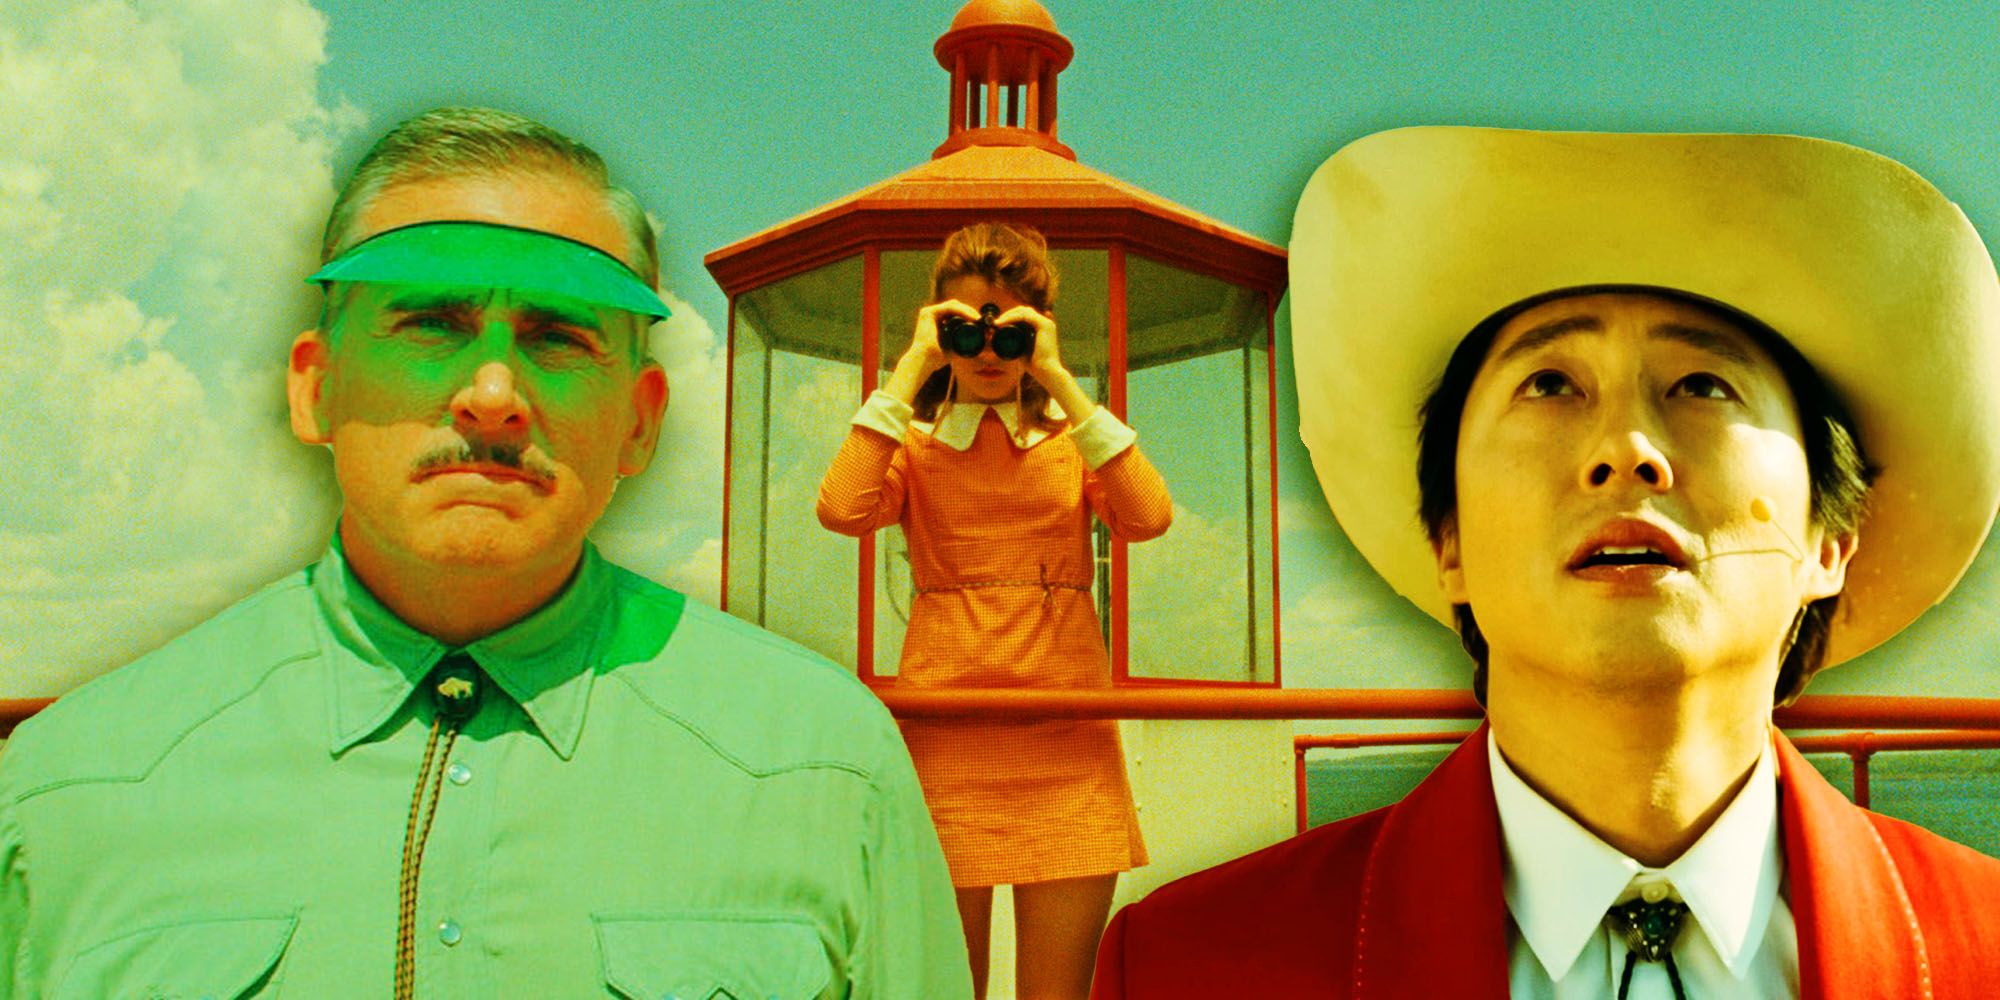 Split image of stills from Asteroid City, Moonrise Kingdom, and Nope